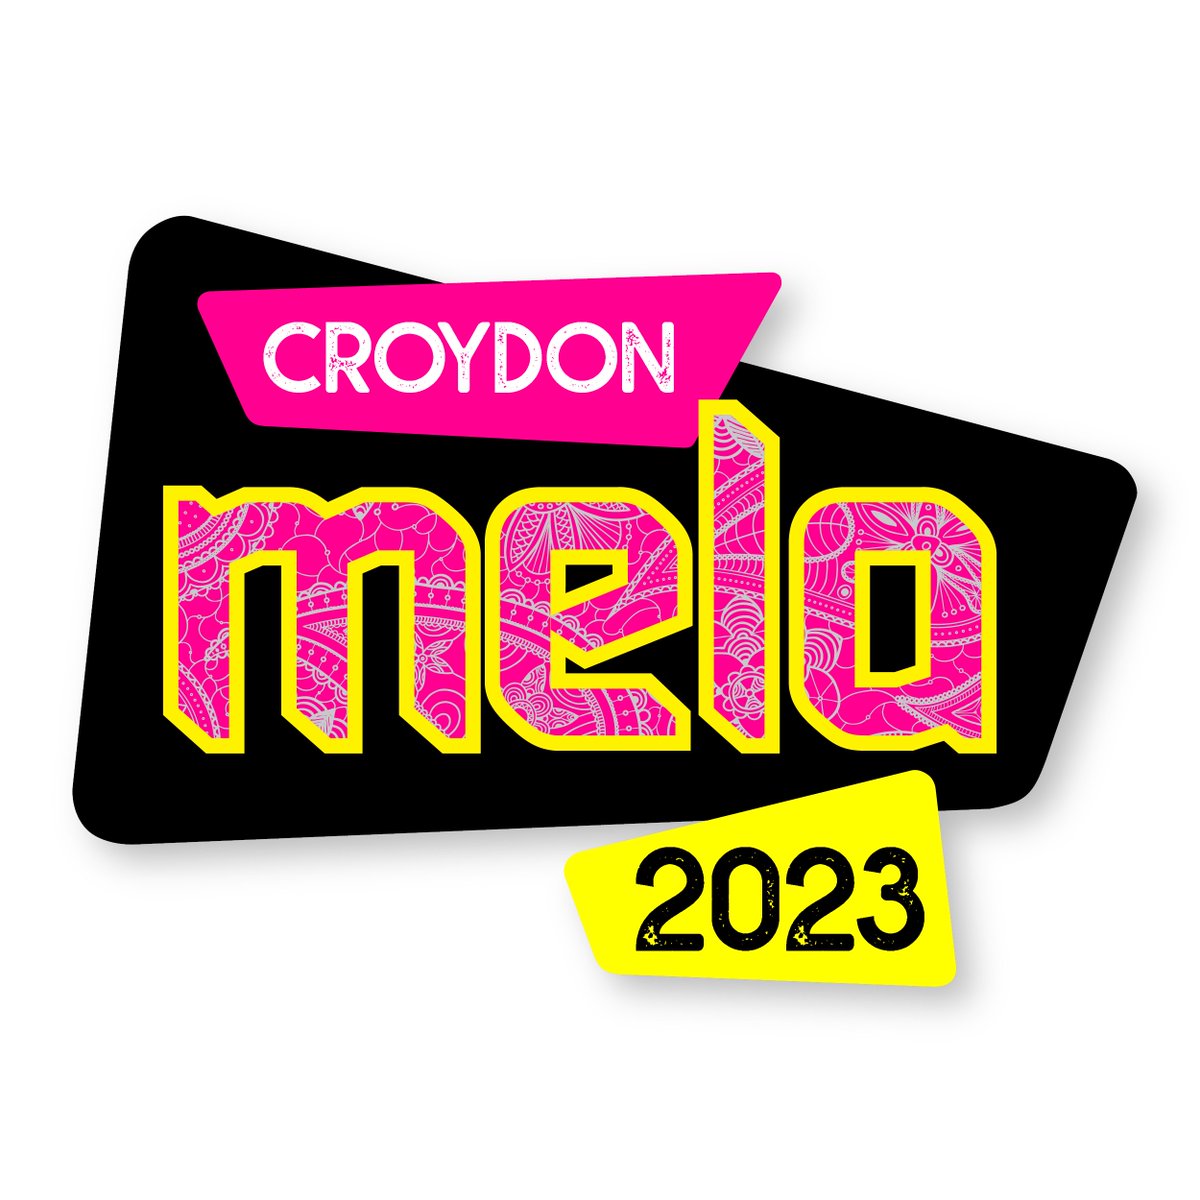 CroydonMela is BACK & it's gonna be epic! Don't miss out on a day packed full of Croydon culture - music, dance, art and more! Mark your calendars and join us at the #Bhangra and #Mela Wandle Park in Croydon! croydonmela.com #Croydon #CroydonCulture @ApsaraArts